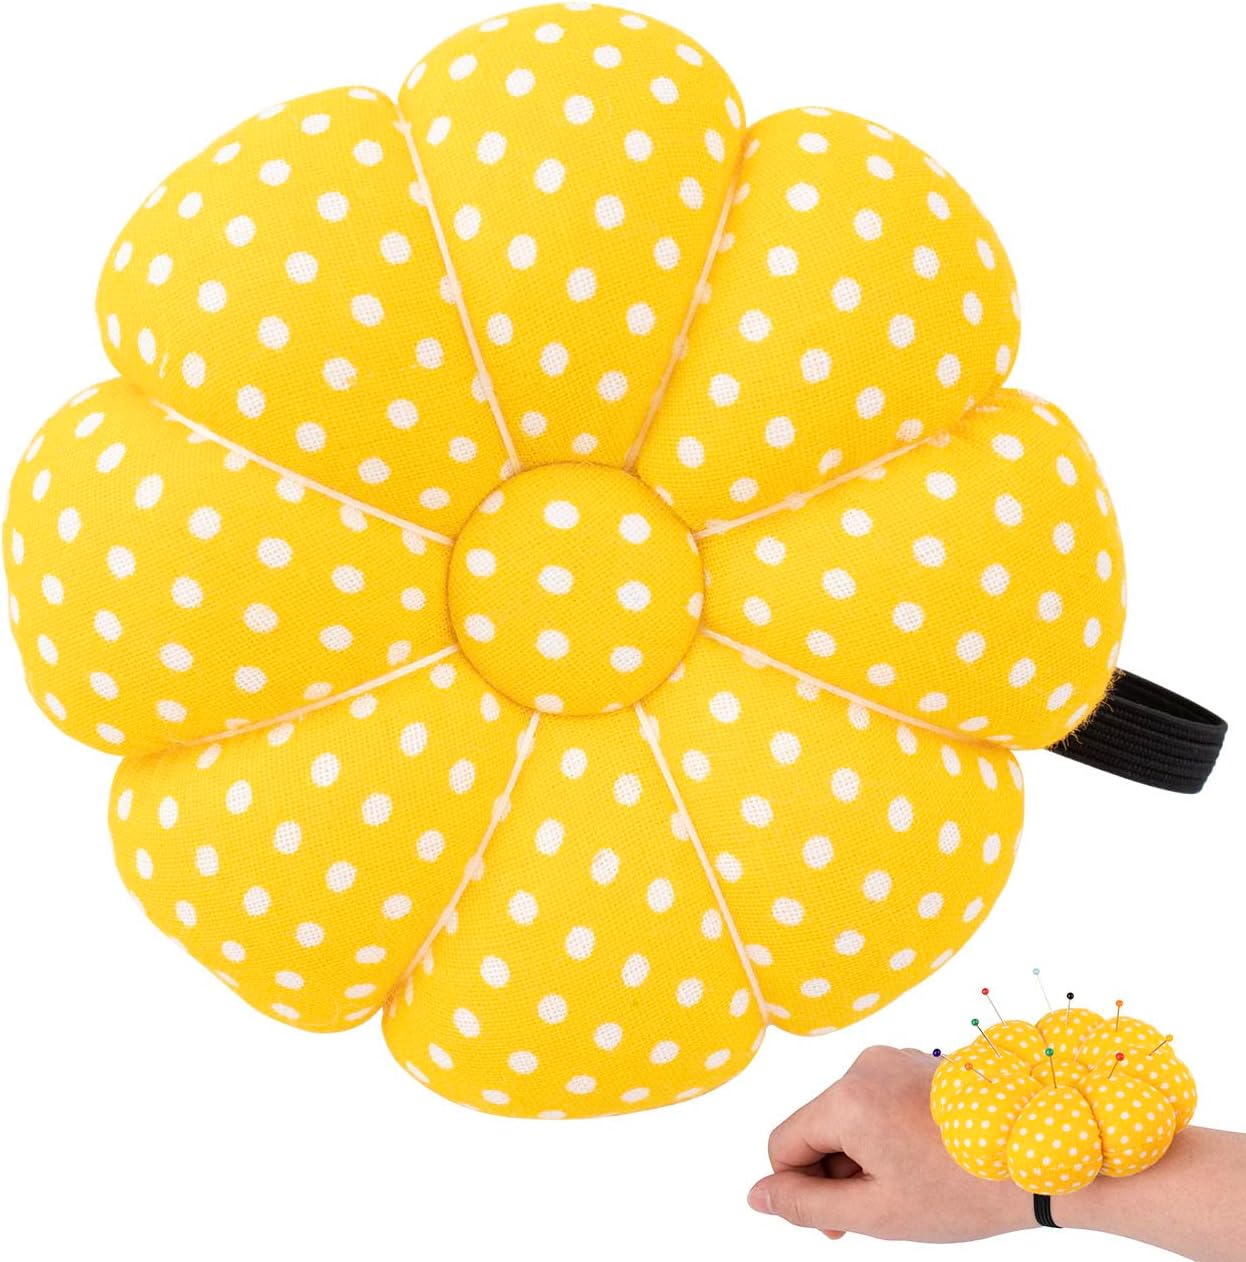 Rolybag Pin Cushions Wrist Pins Cushions with Elastic [...]